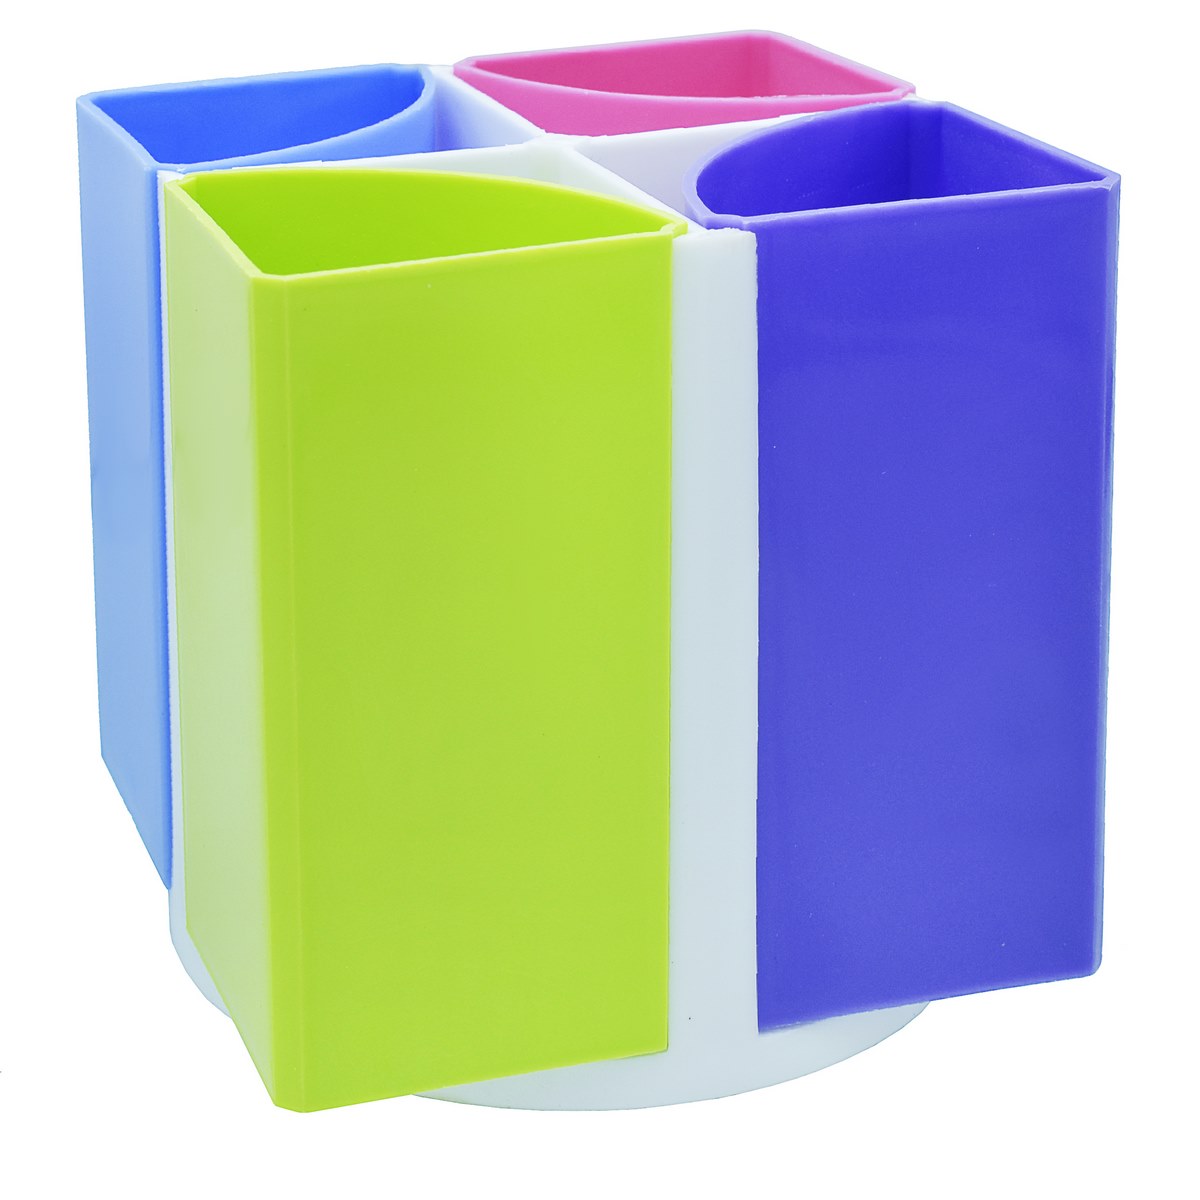 Detachable Multicolor Plastic Pen Stand - For College, Shops, Office Use, Corporate Gifting, Promotions